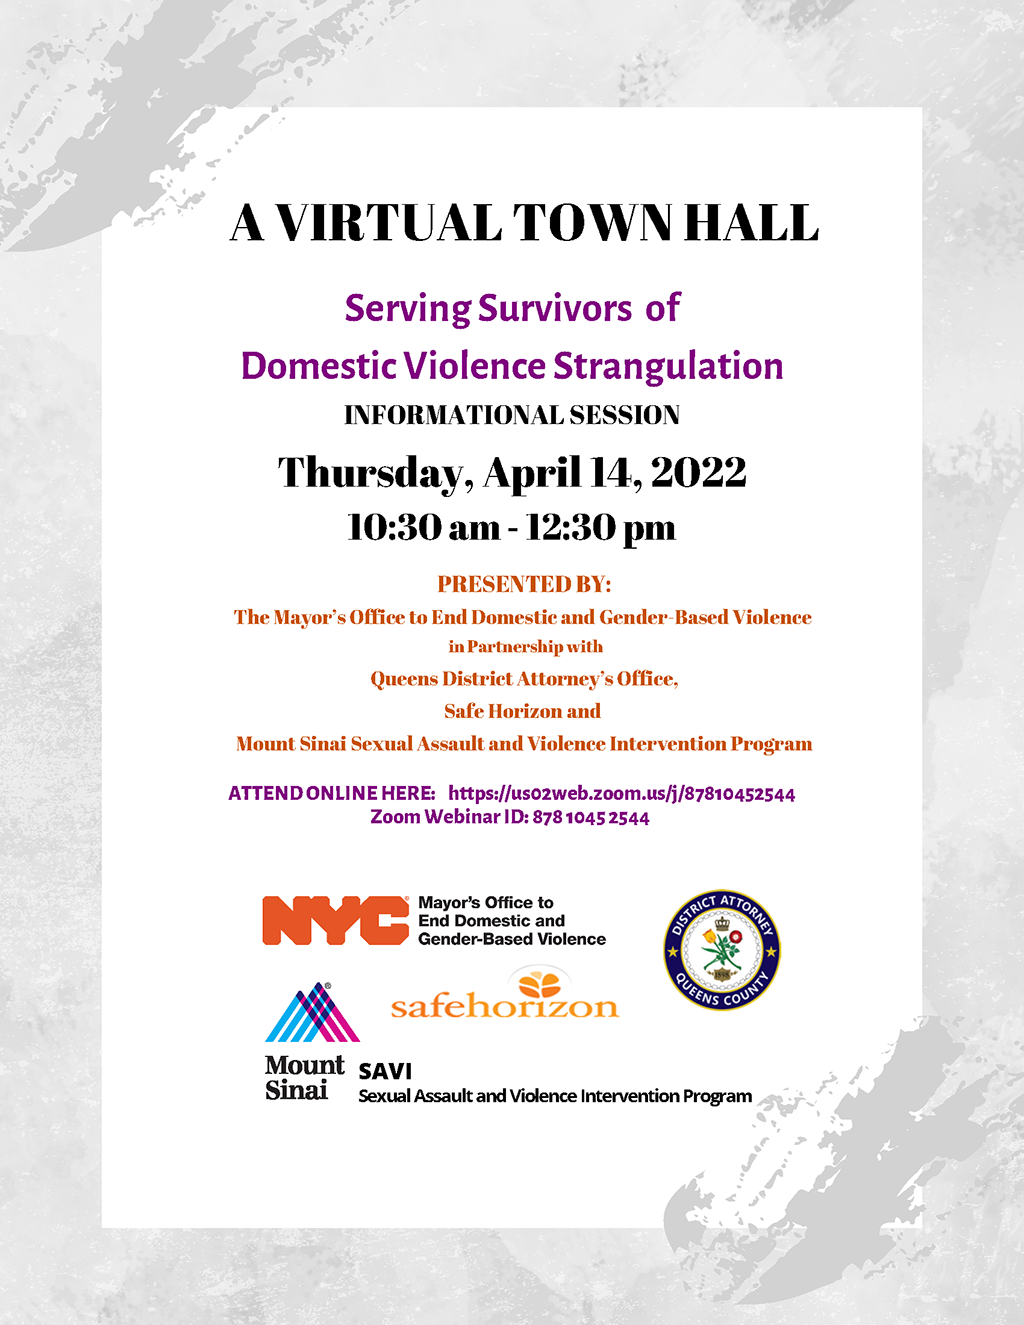 Title of A Virtual Town Hall Informational Session Serving Survivors of Domestic Violence Strangulation on Thursday, April 14, 2022; 10:30 am to 12:30 pm presented by The Mayor’s Office to End Domestic and Gender-Based Violence with logo; Queens District Attorney’s Office with logo, Safe Horizon with logo and Mount Sinai Sexual Assault and Violence Intervention Program with logo